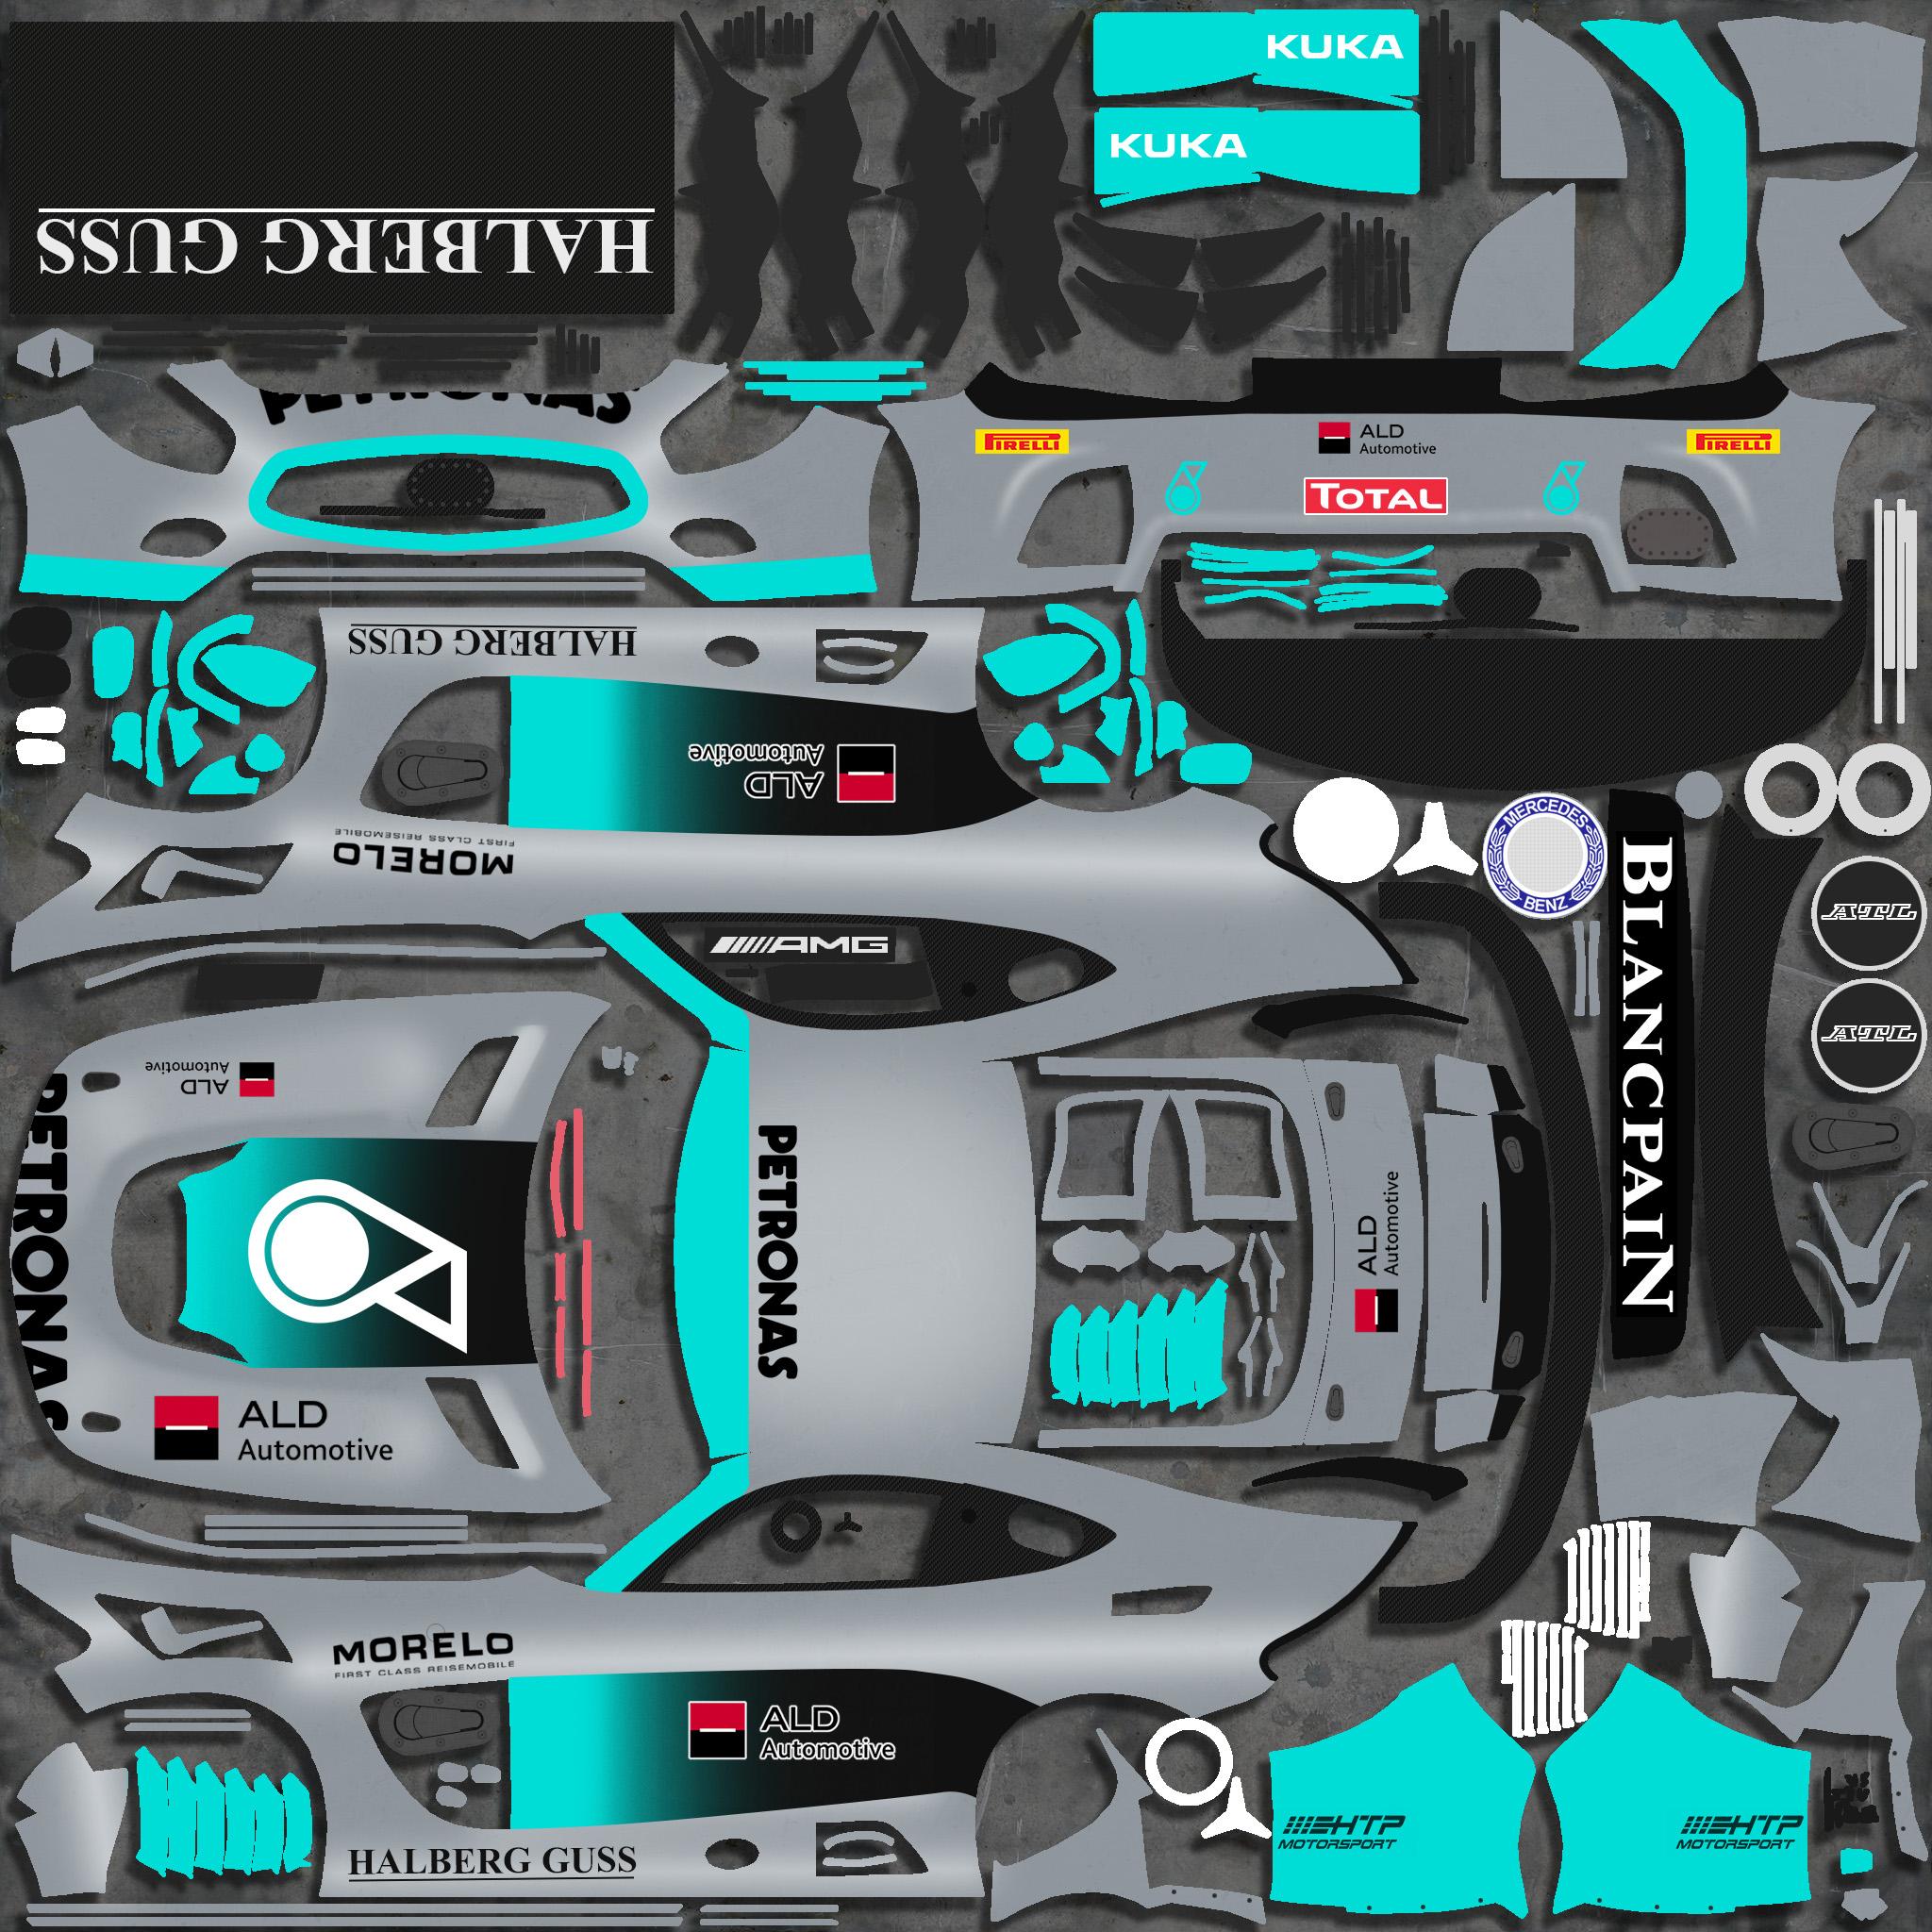 Preview of  #86 HTP Motorsport PETRONAS (Spa 24h) by Justin S Davis